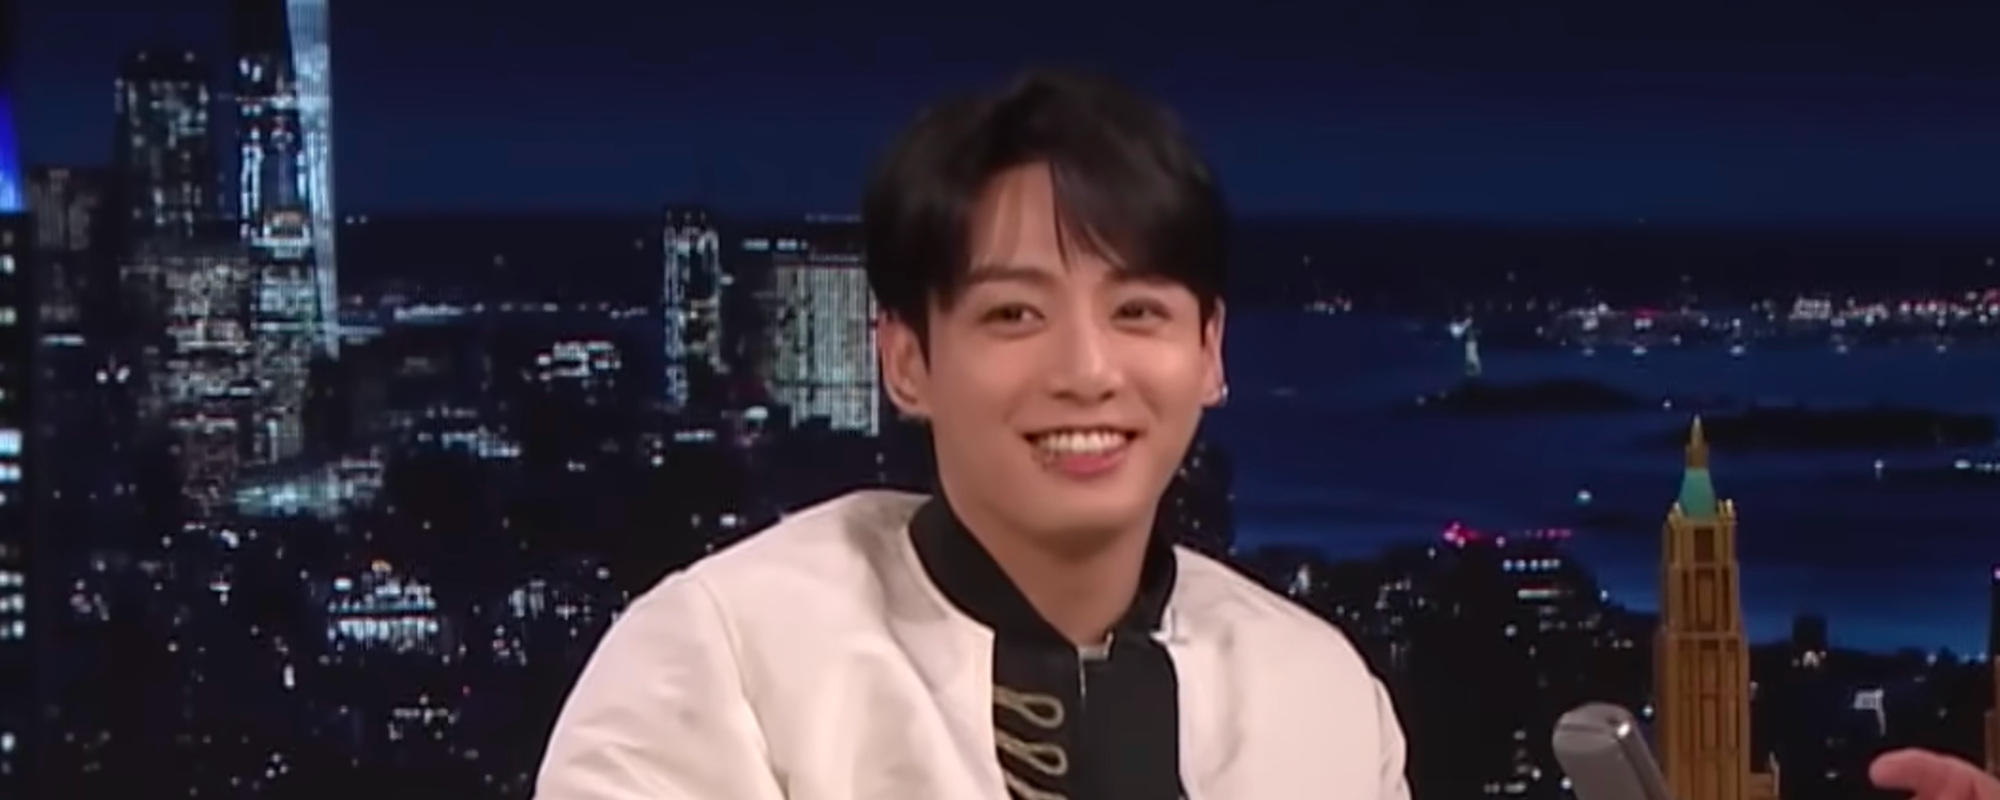 BTS’ Jungkook Reacts to New Single Going Platinum (Watch)